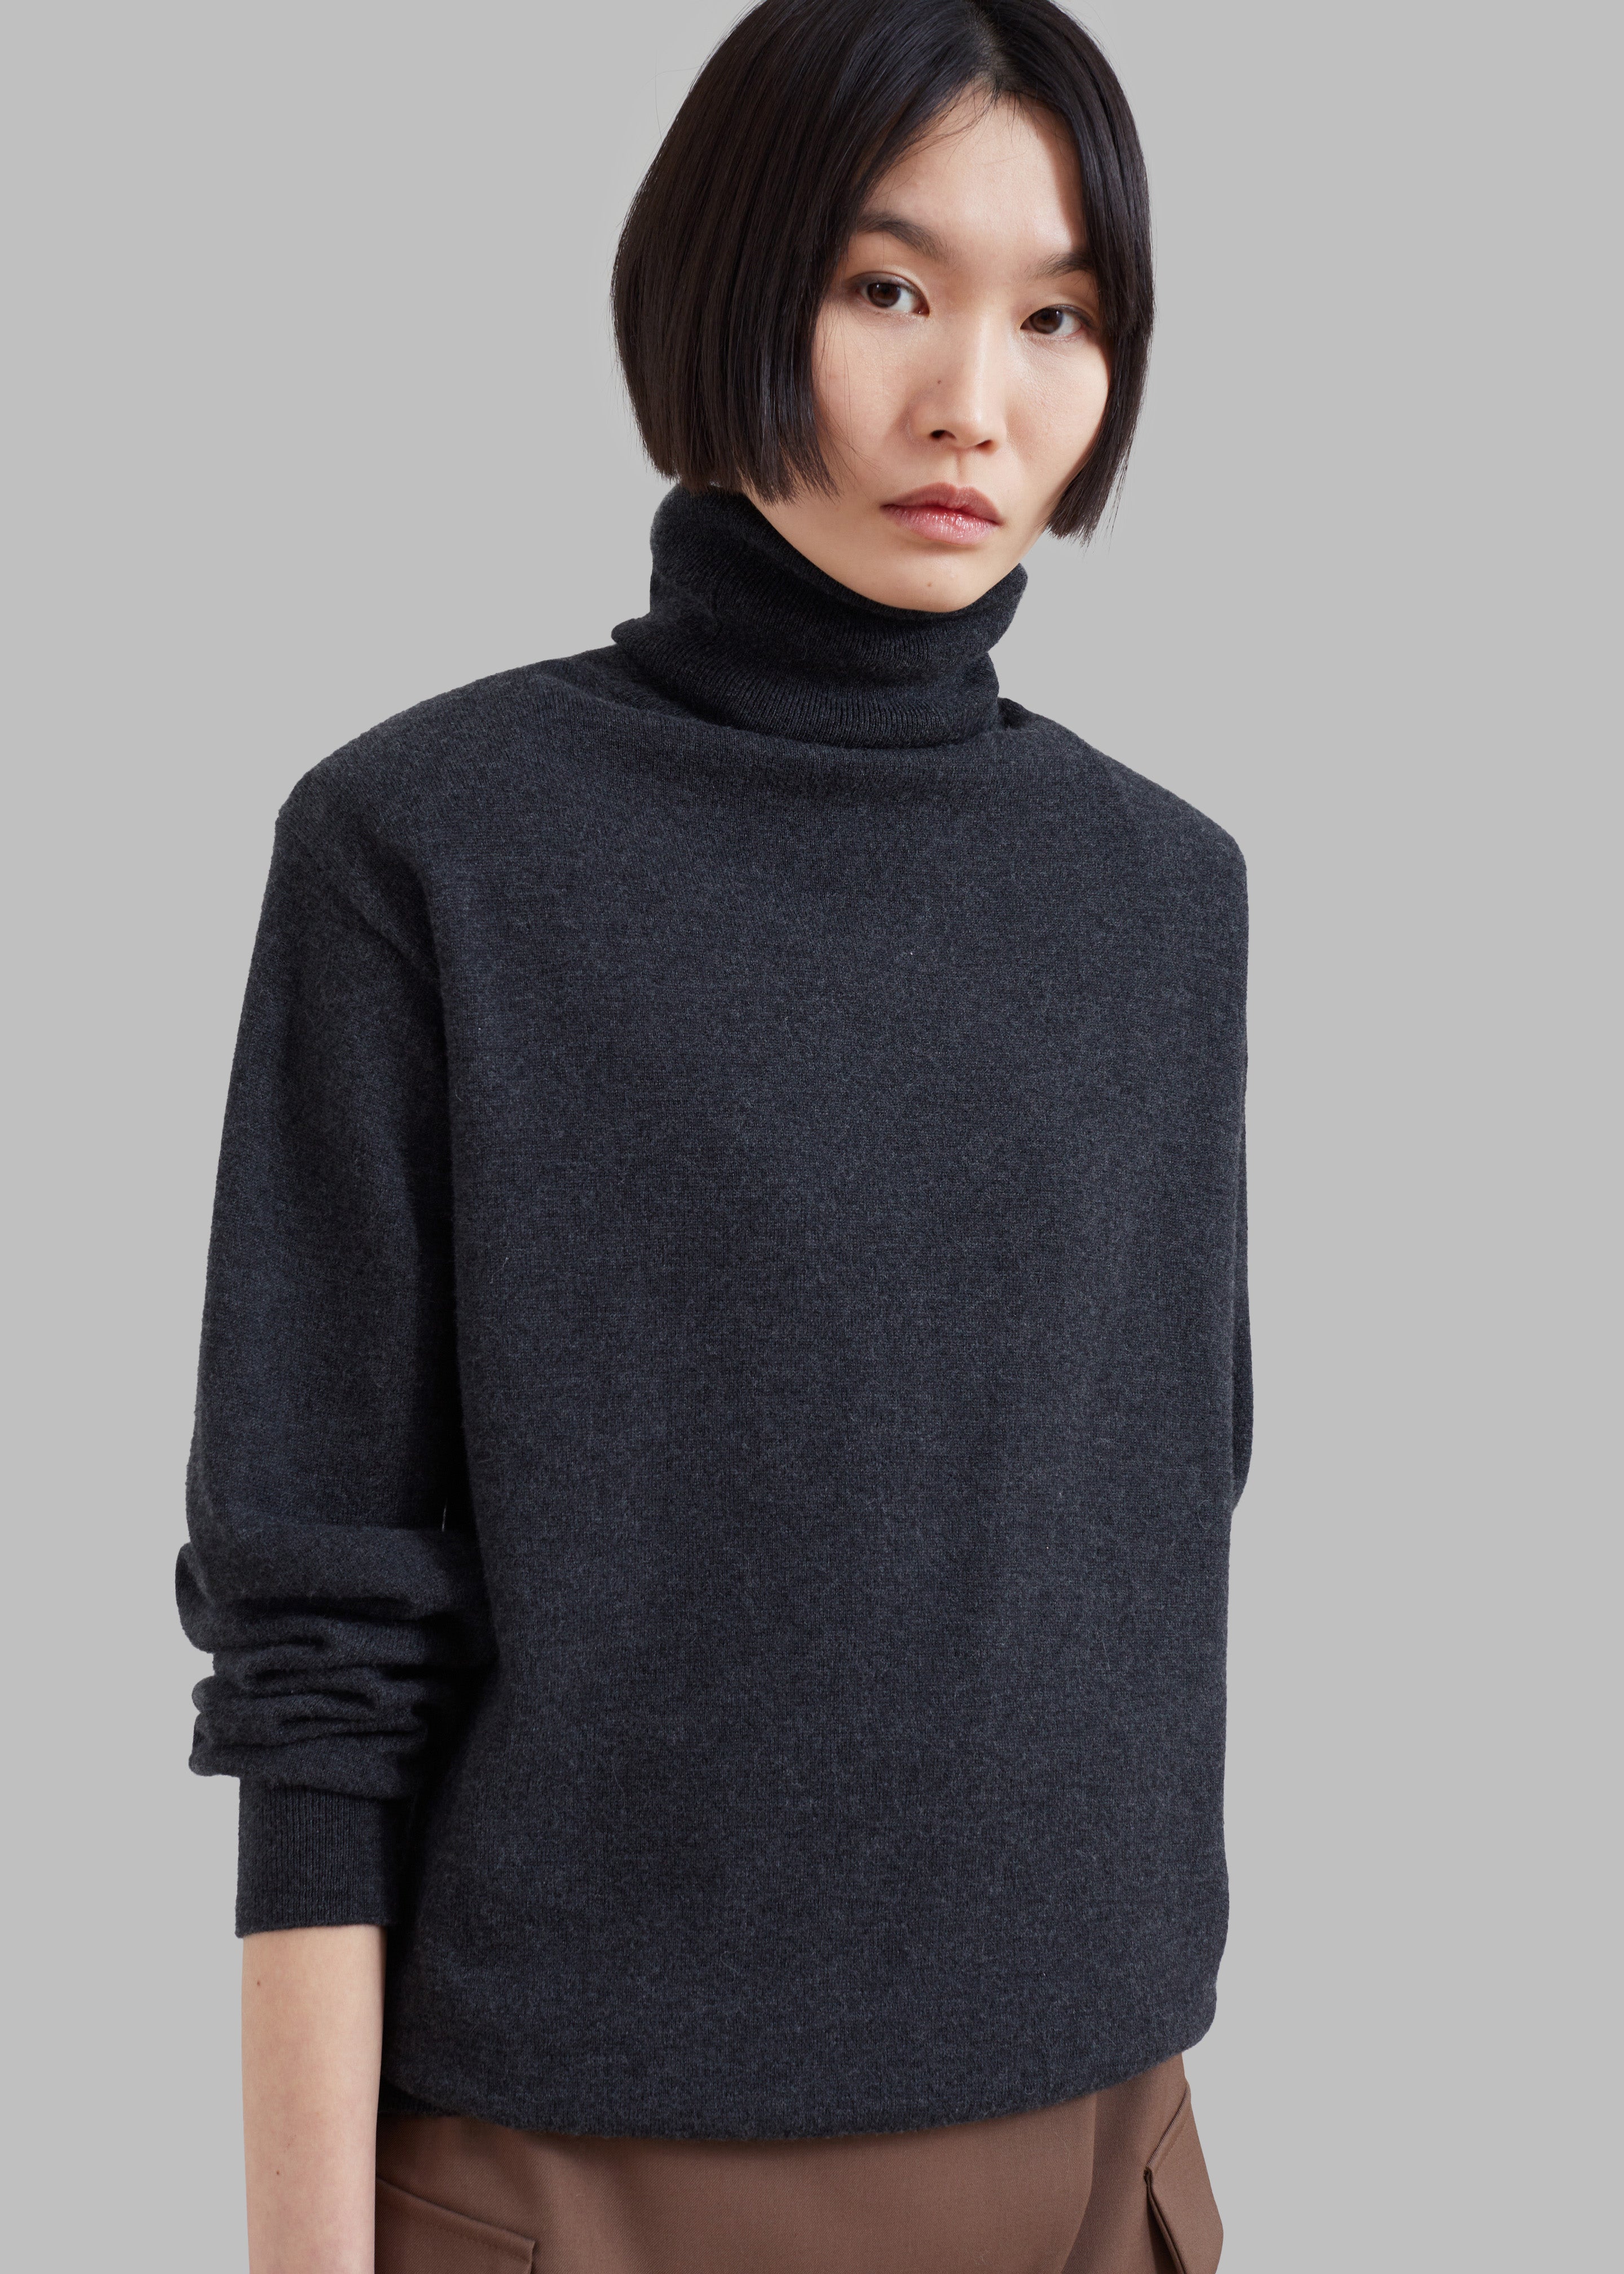 Ines Thin Padded Turtleneck - Charcoal - 4